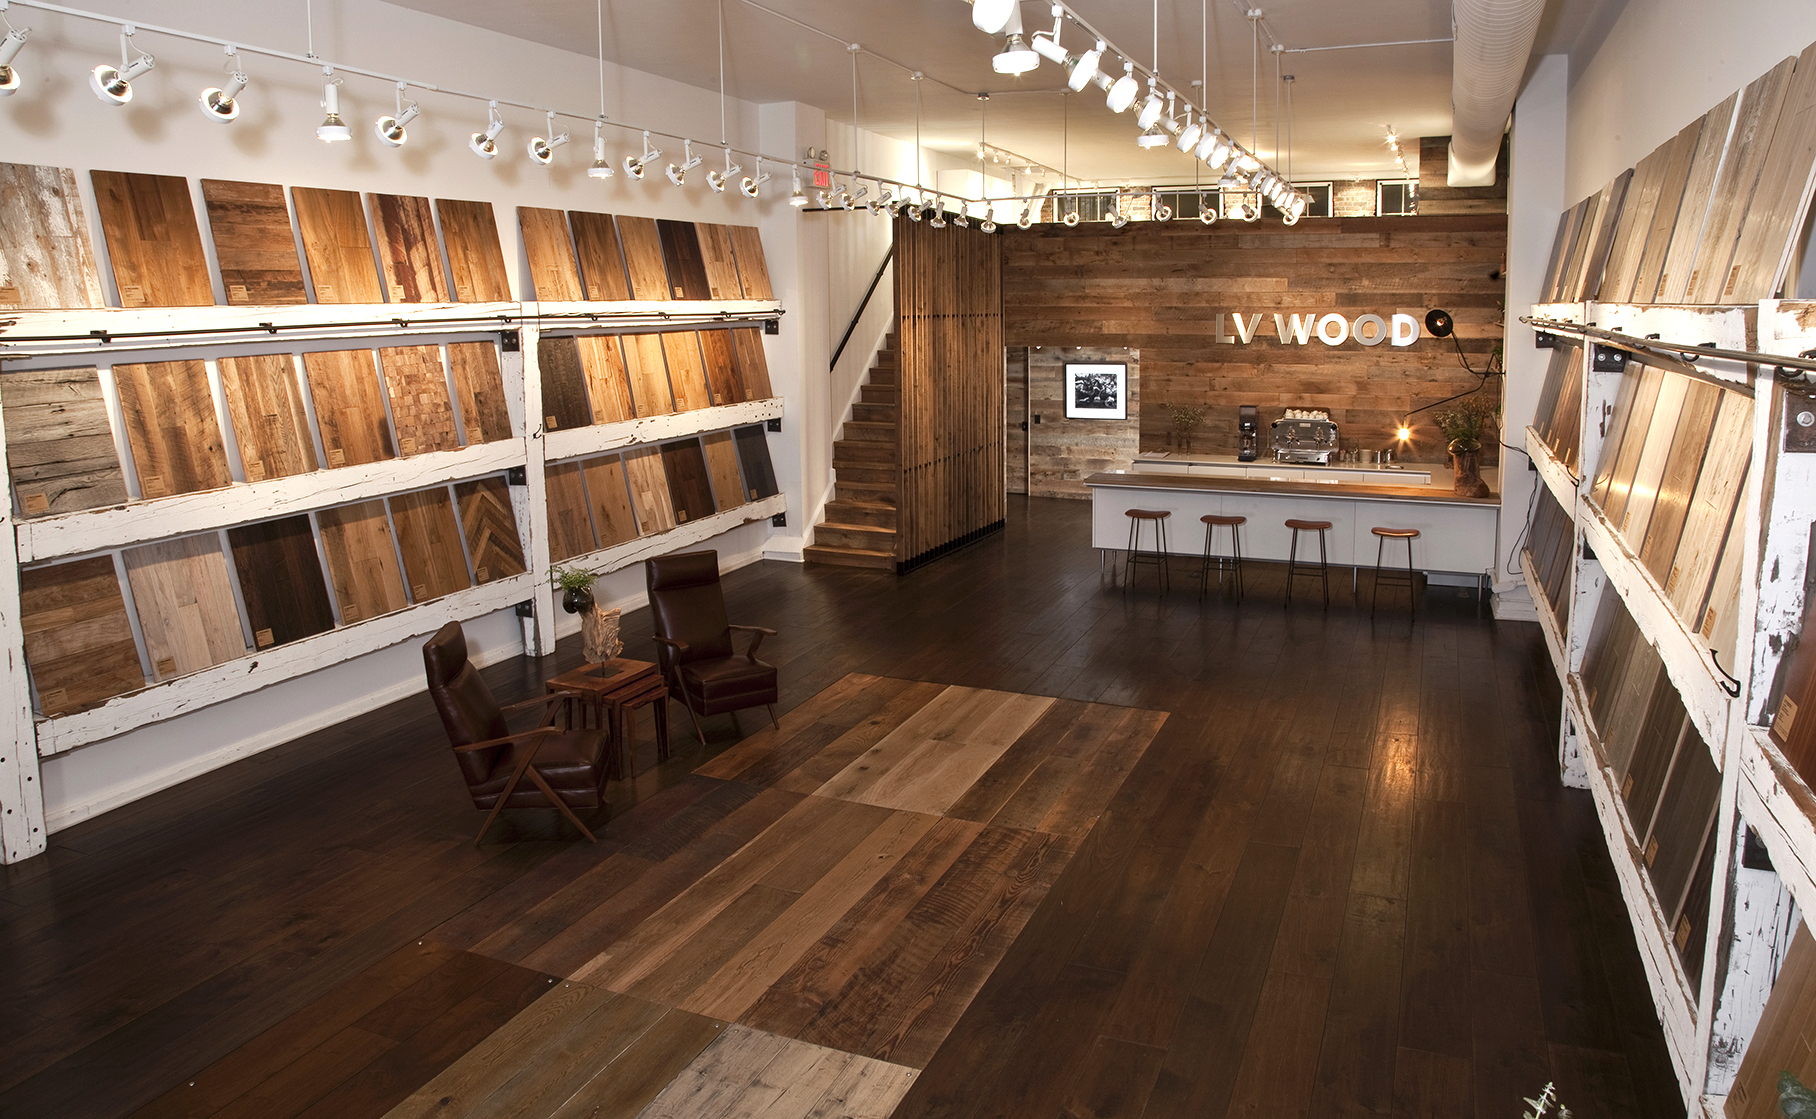 LV Wood, Wood, Wood Floors and Surfaces